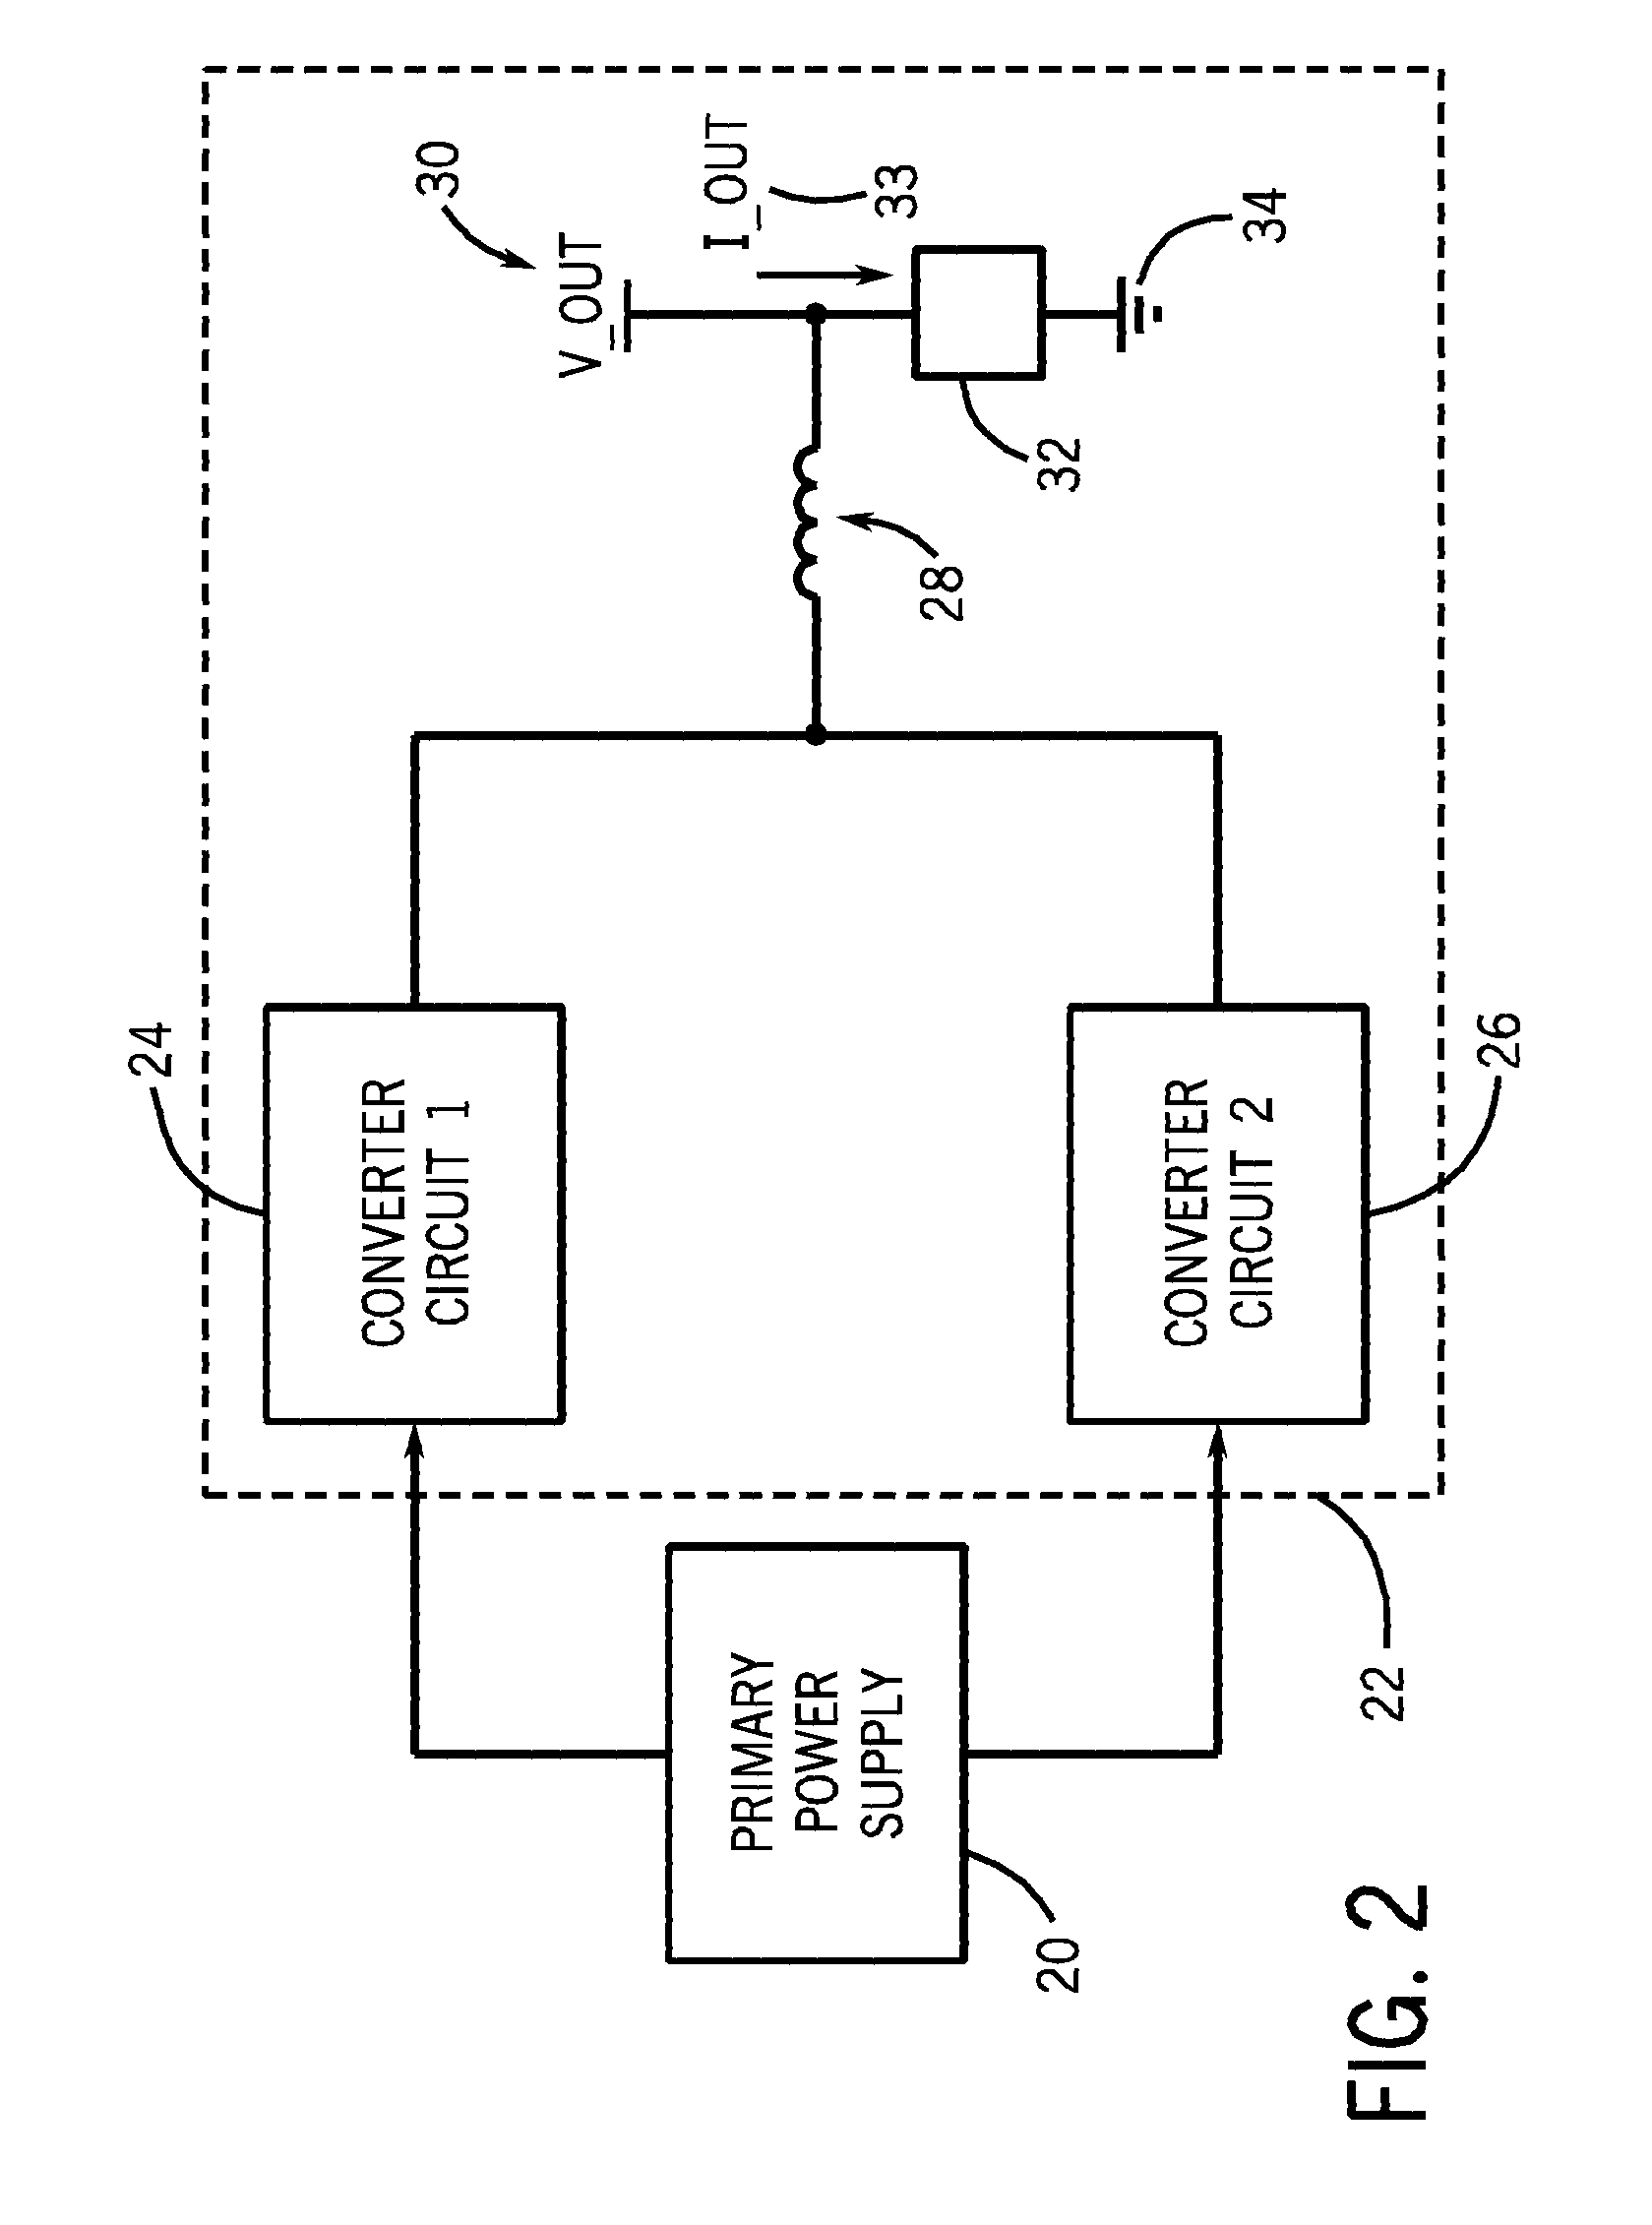 Welding or cutting power supply using phase shift double forward converter circuit (PSDF)